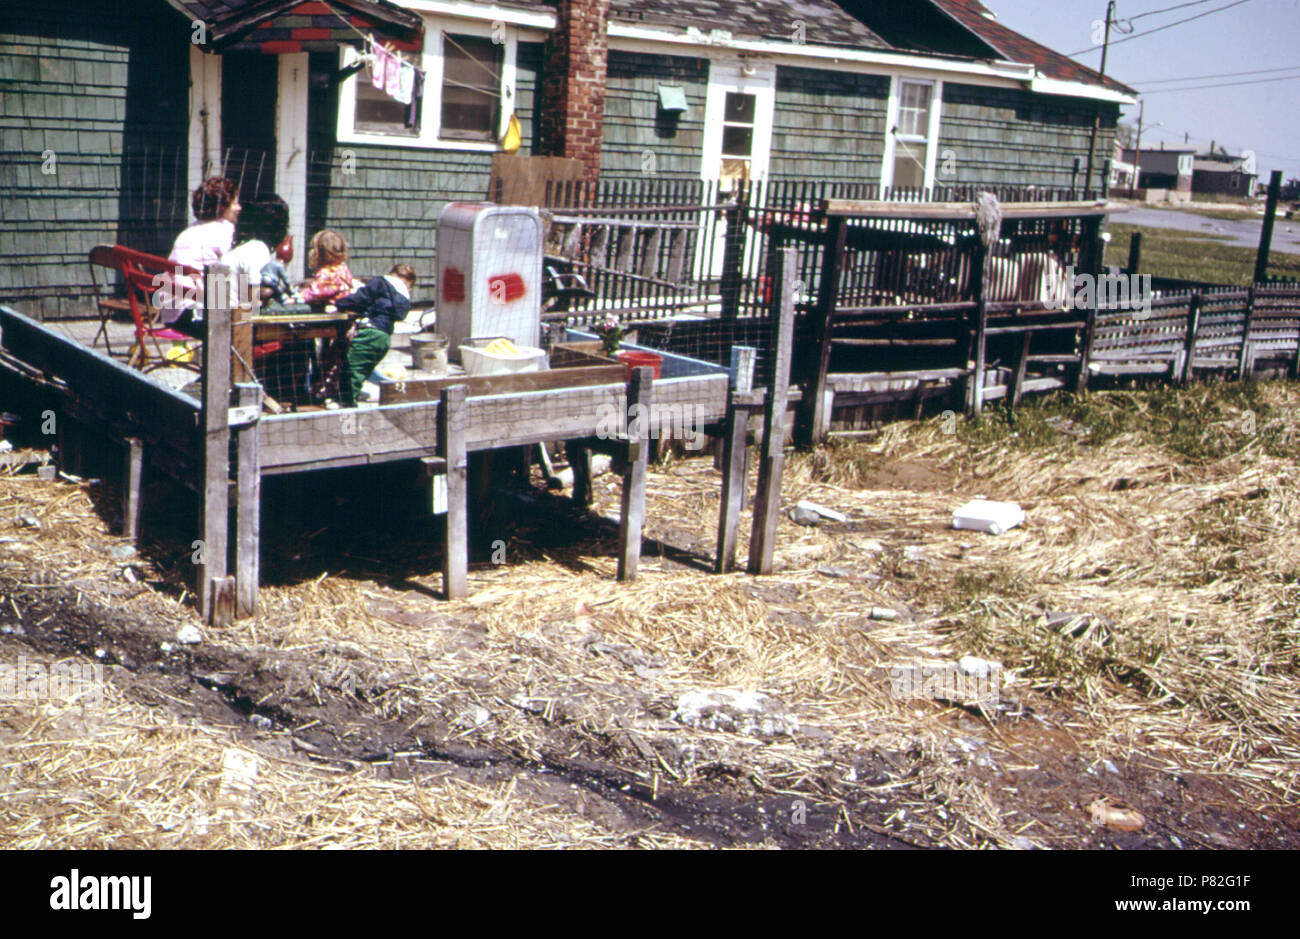 Wastes from This Home in Broad Channel Are Carried Into Jamaica Bay Via Ditch. The Community Lacks a Municipal Sewage System 05 1973 Stock Photo